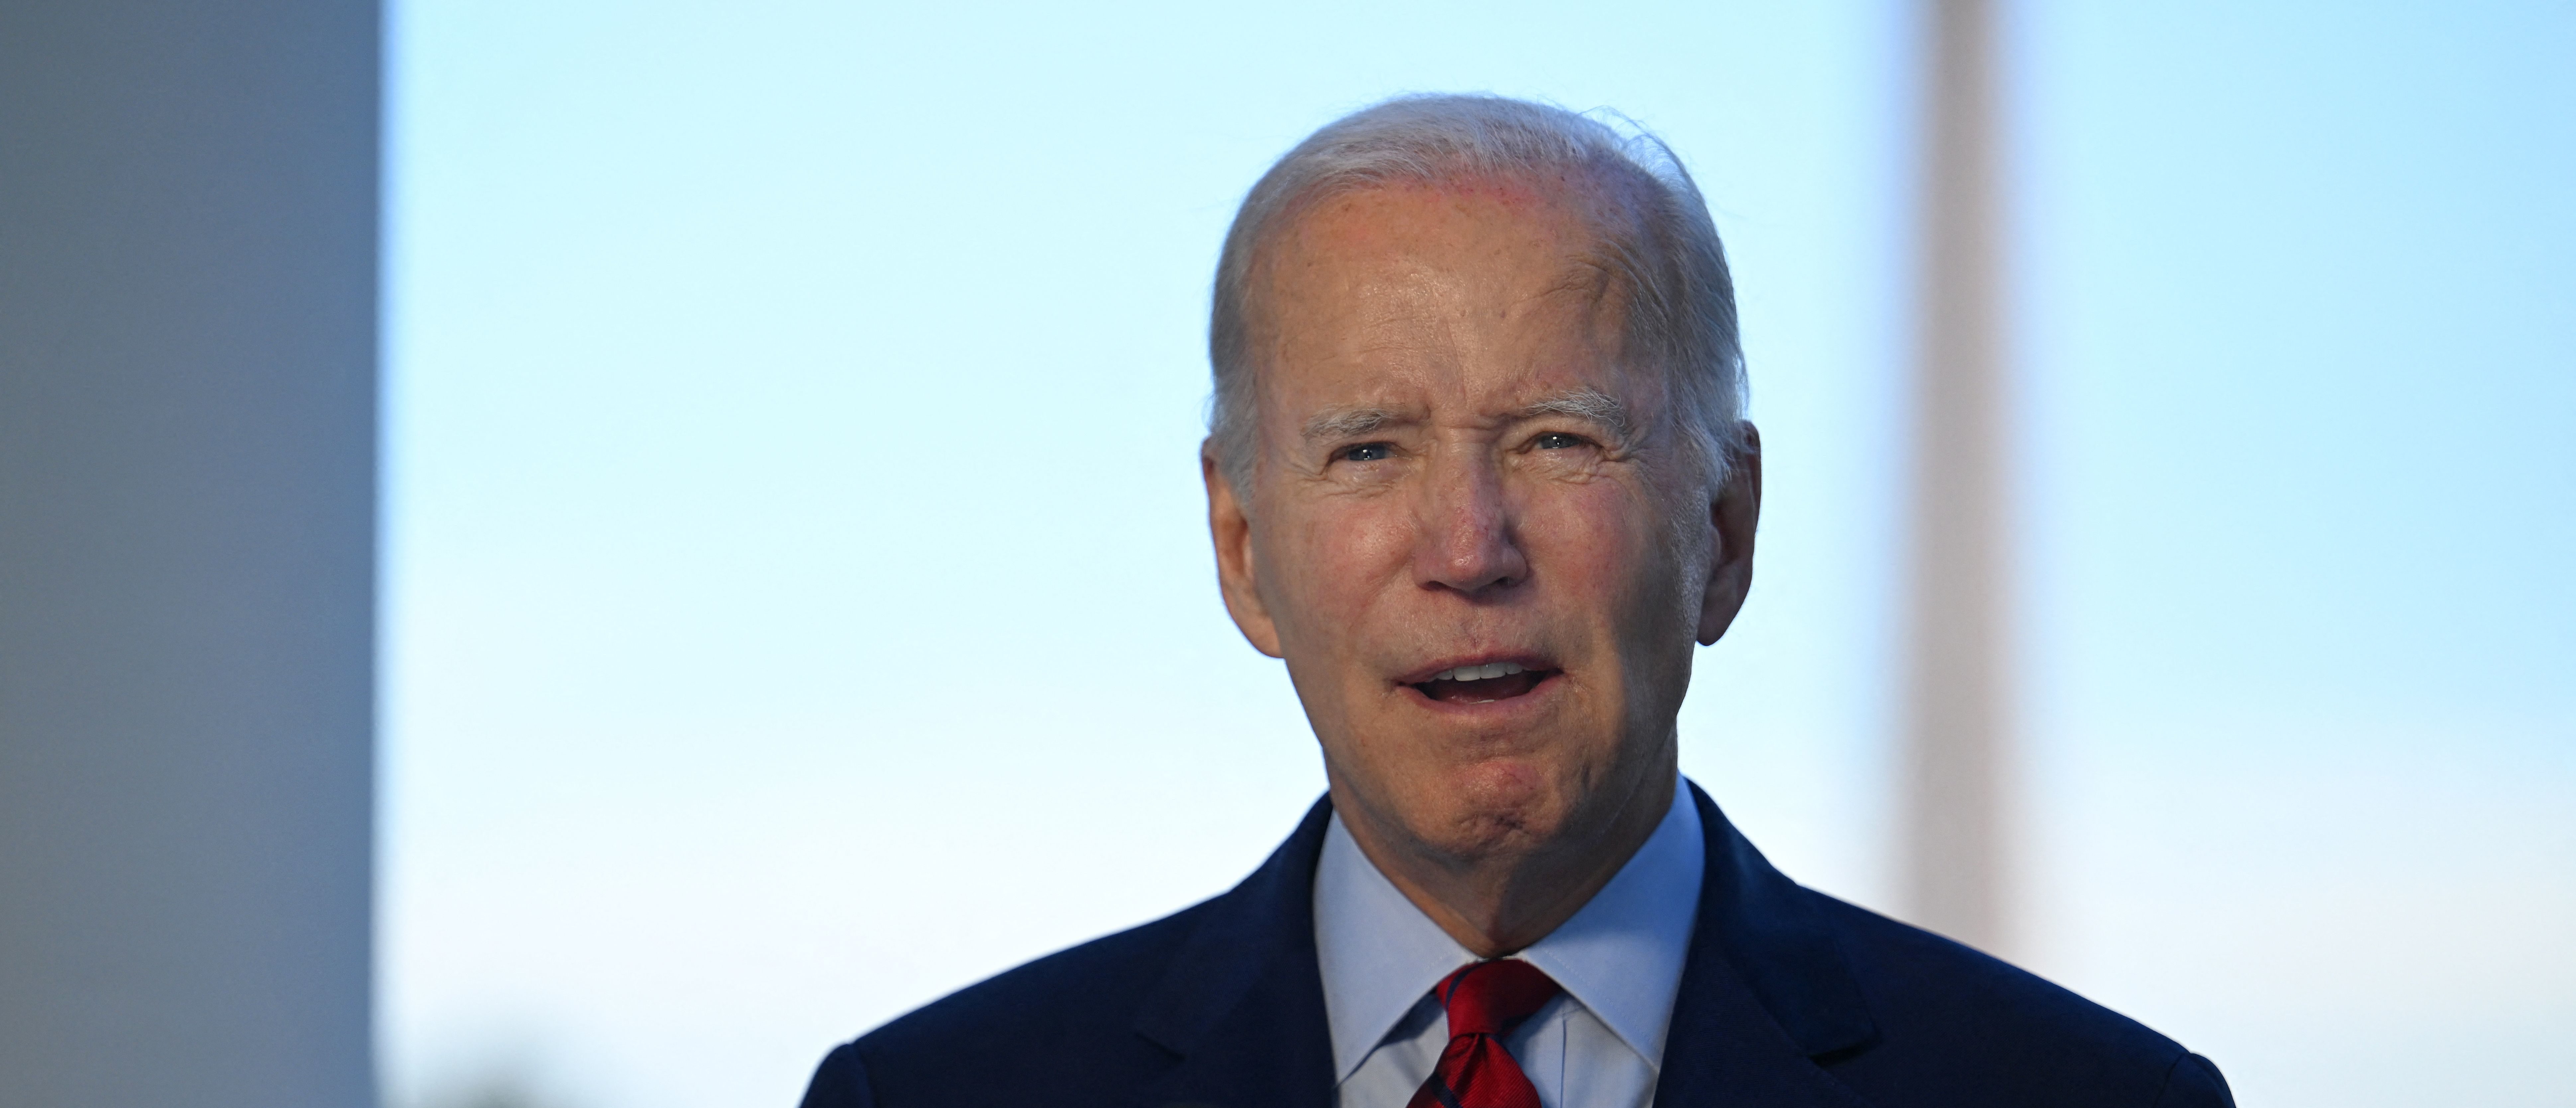 SHEFFIELD: Biden Tries To Get Americans To Look Away From Troubling Fact In Unemployment Report